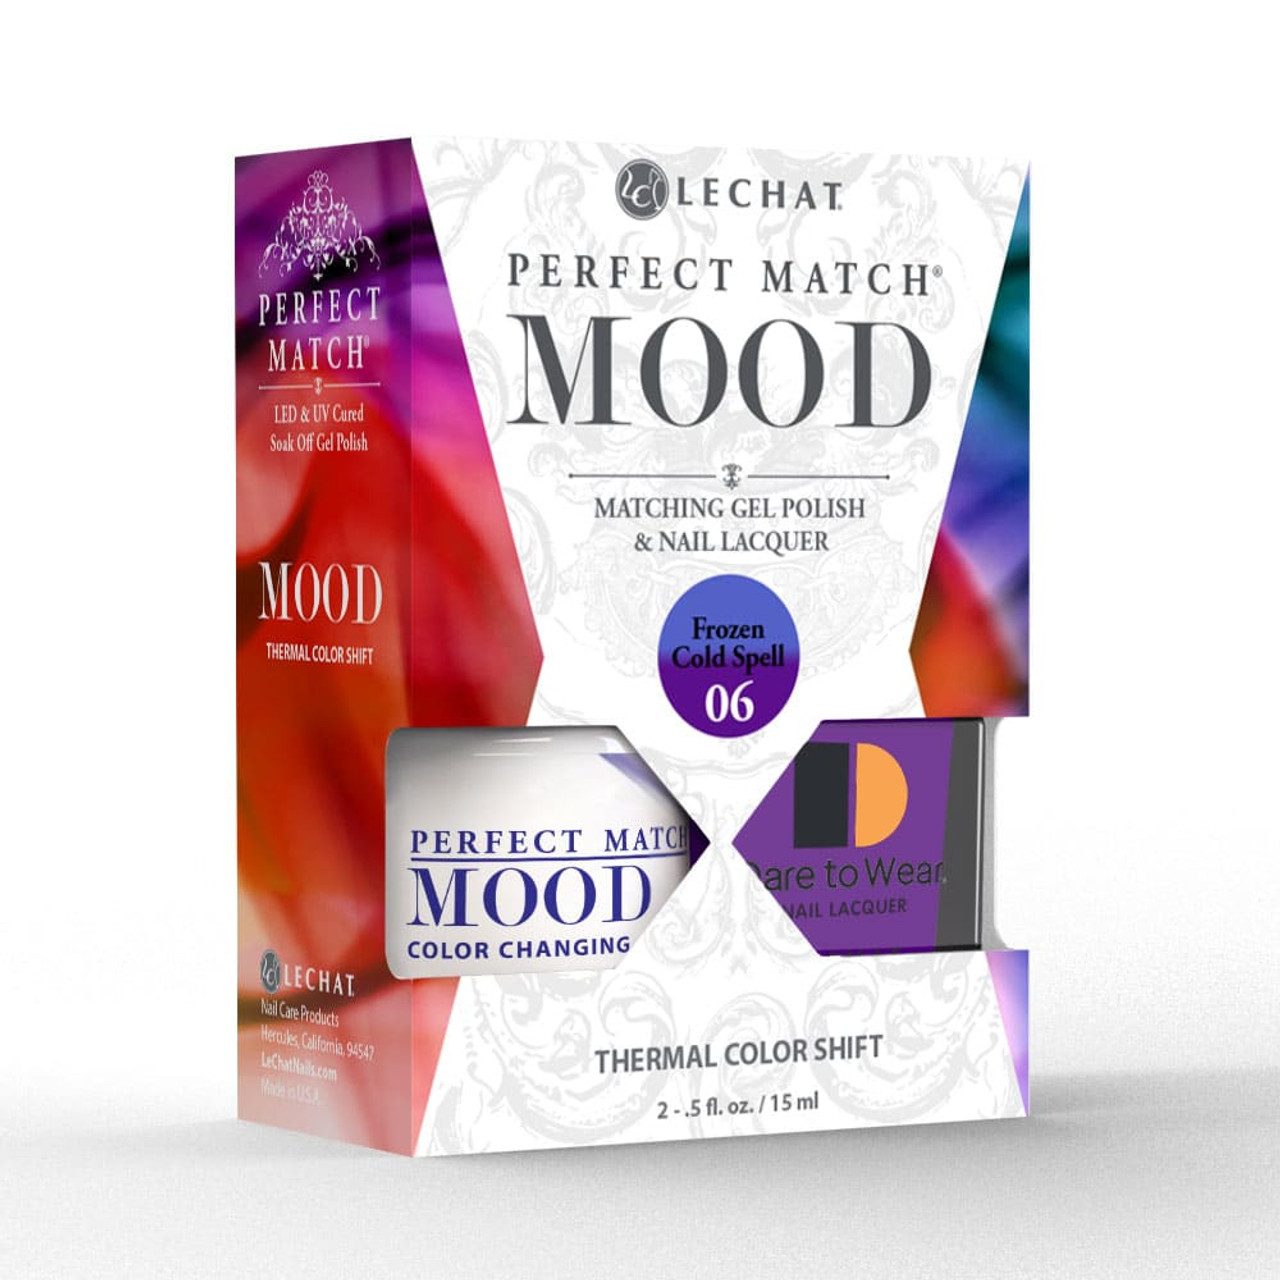 LeChat Perfect Match MOOD Frozen Cold Spell Duo Set